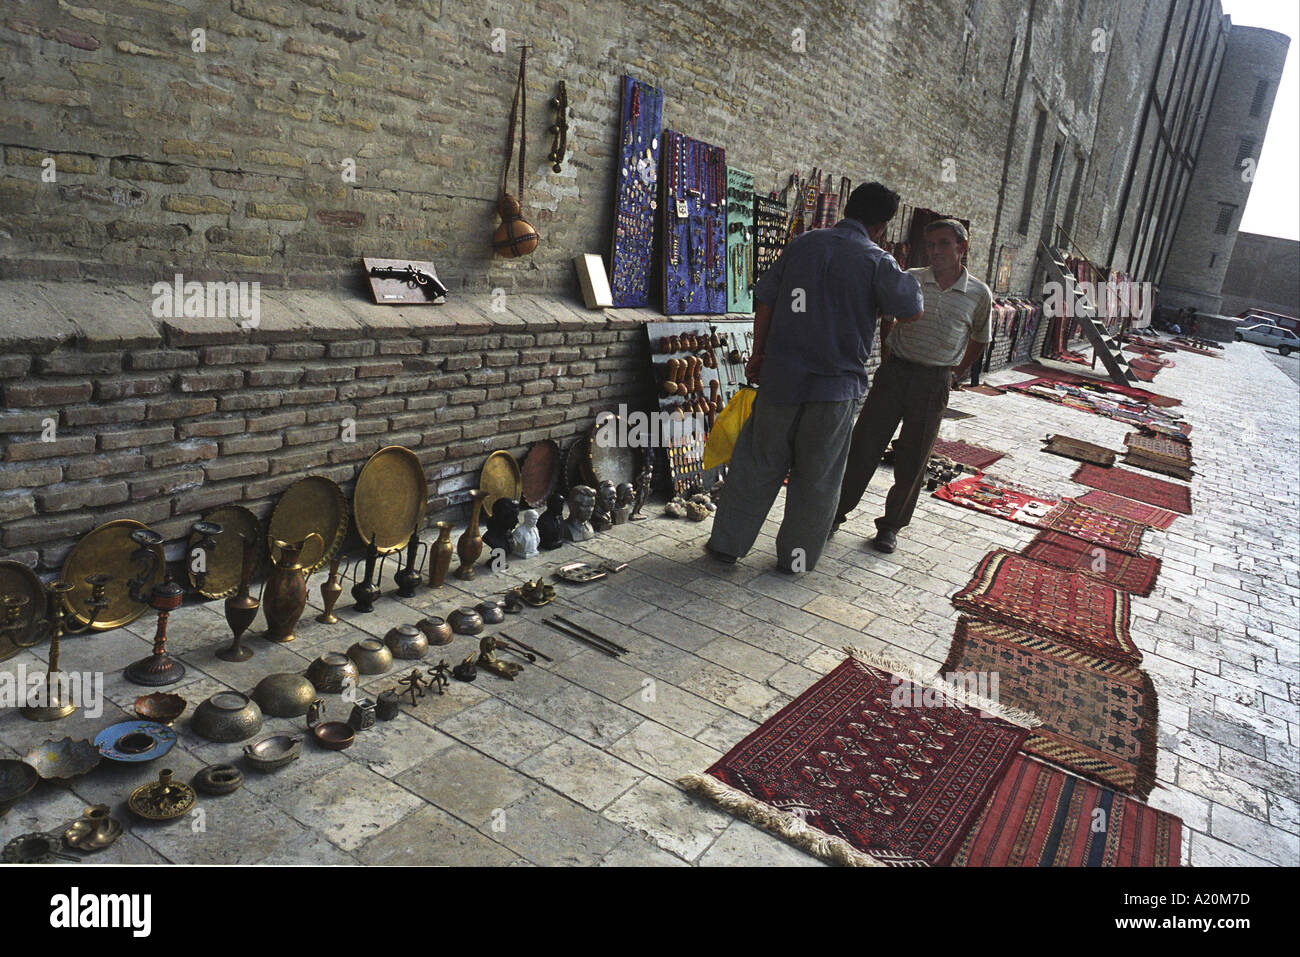 Sellers of carpets and tourist souvenirs in the shade outside the Kalan Mosque and Medressa, Bukhara, Uzbekistan Stock Photo